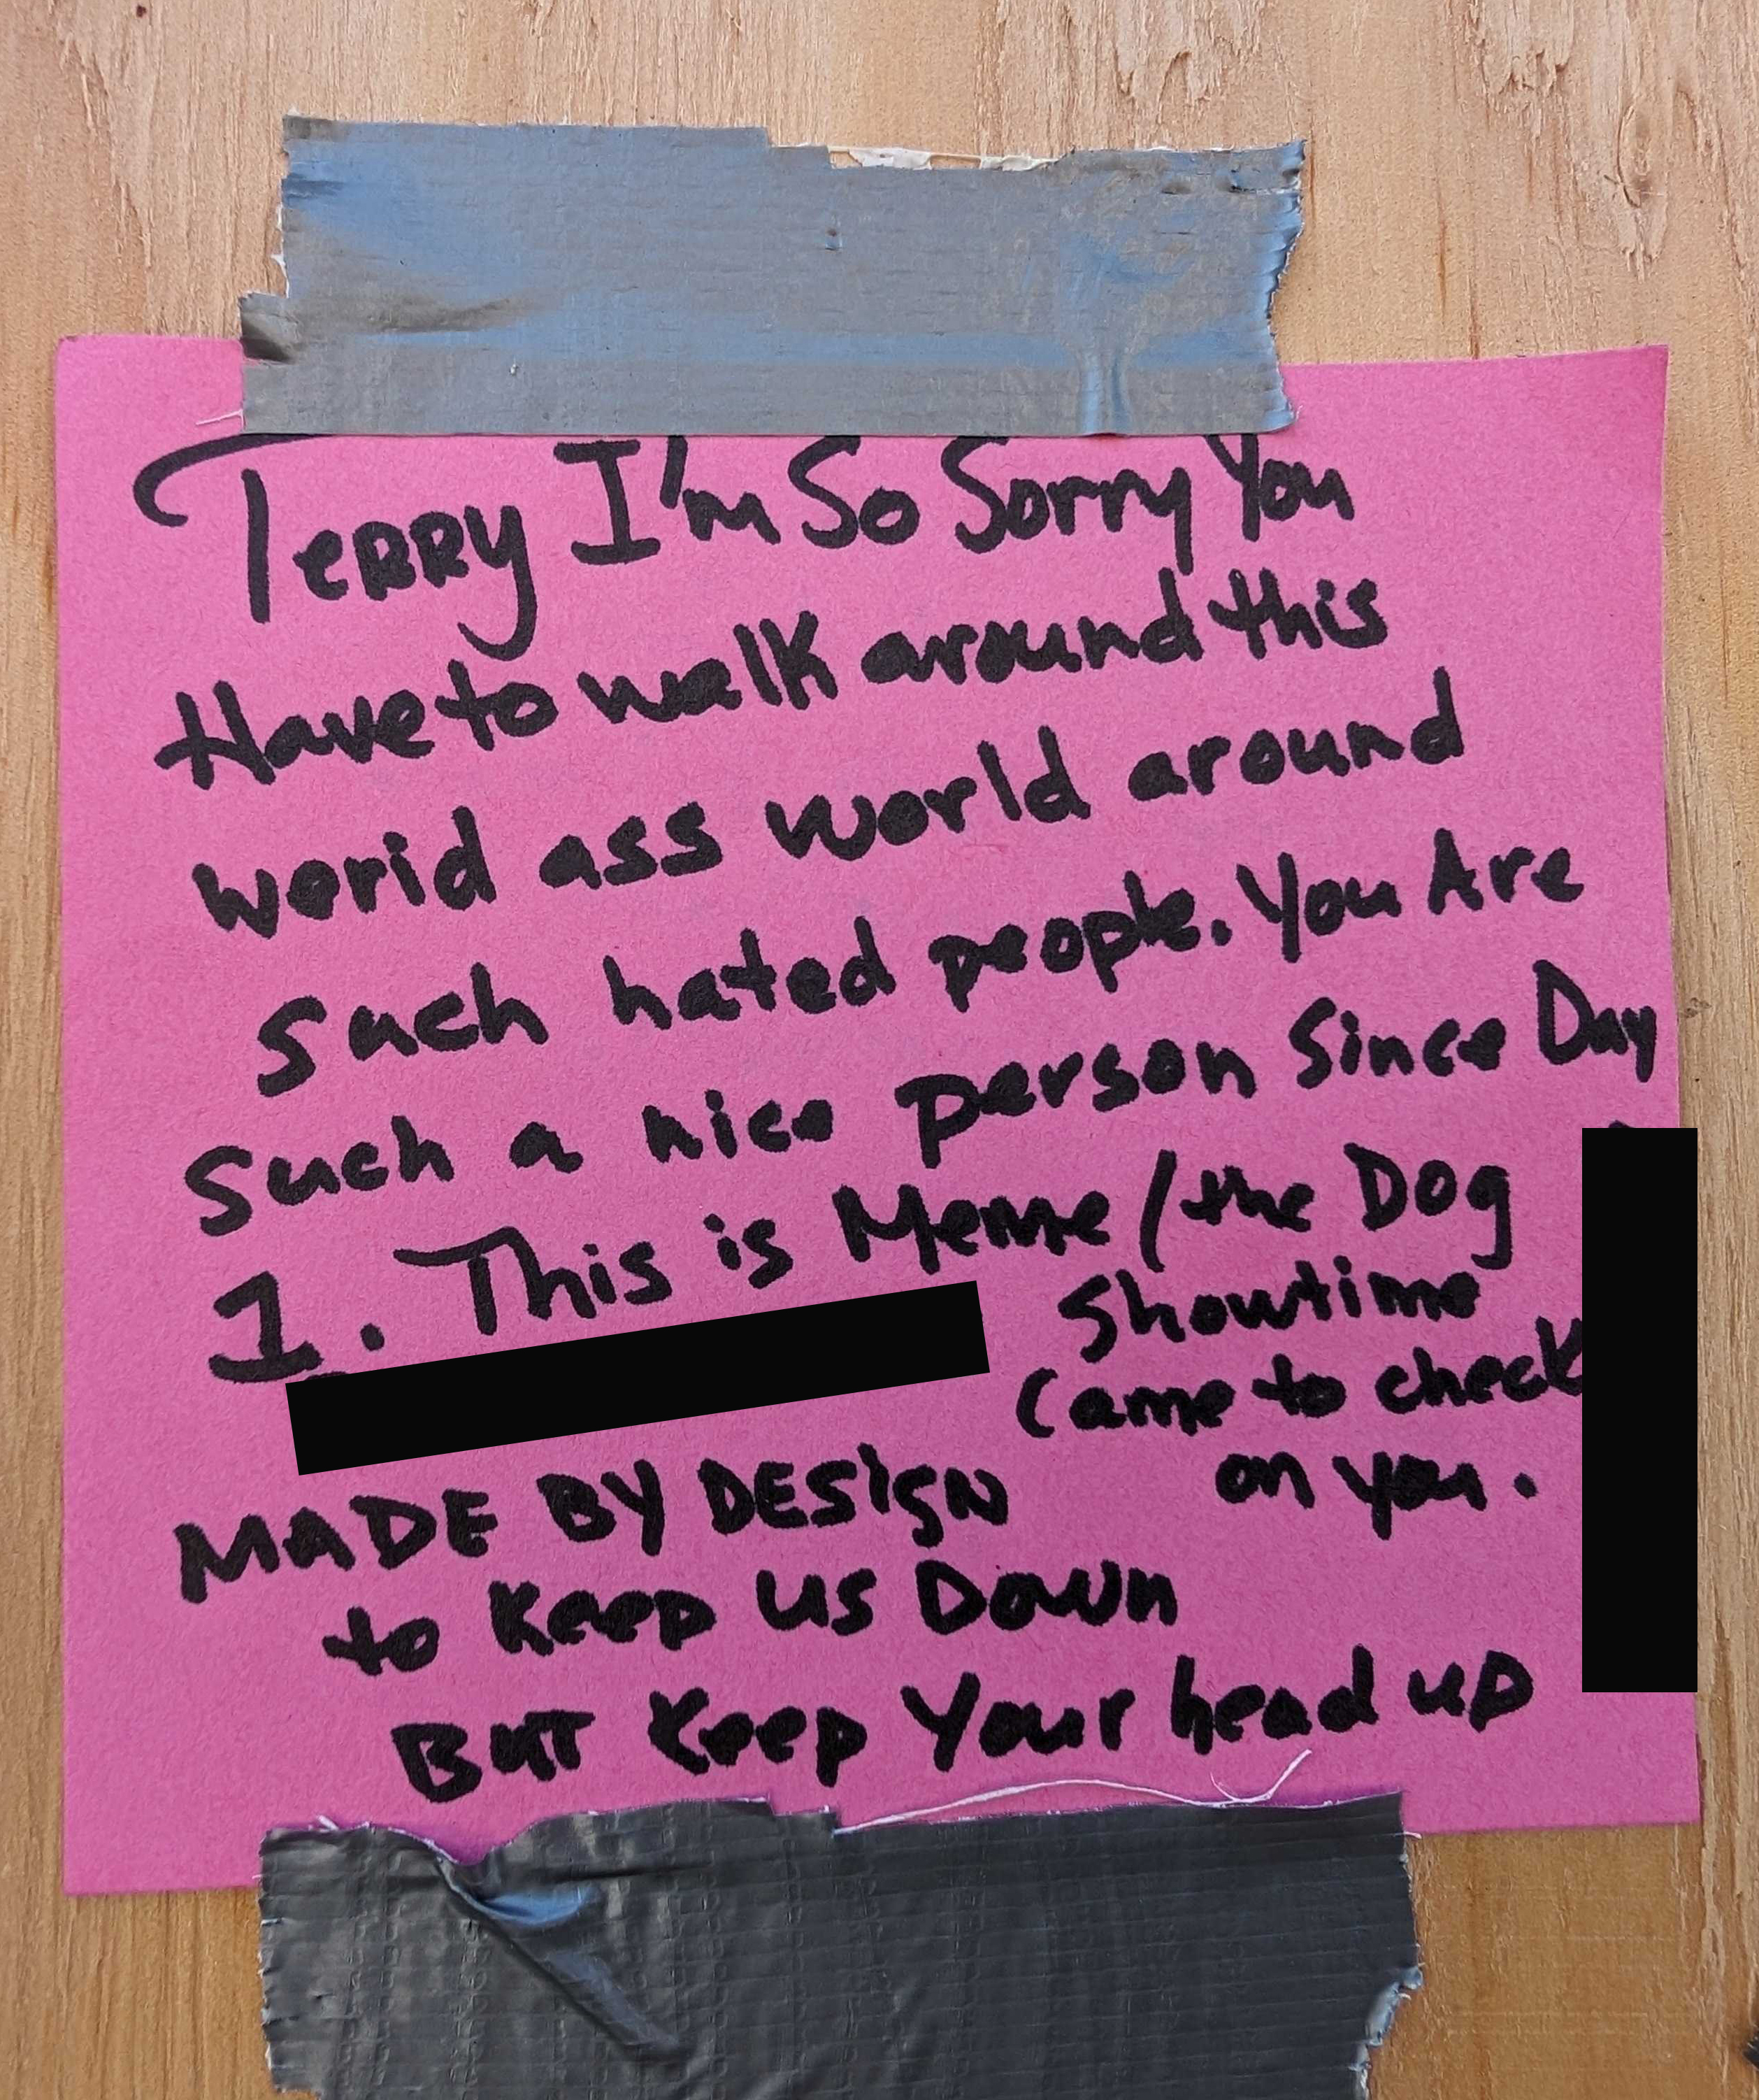 A handwritten note on a pink paper is taped to a wooden surface with duct tape. The note expresses sympathy and encouragement. Parts of the message are redacted.